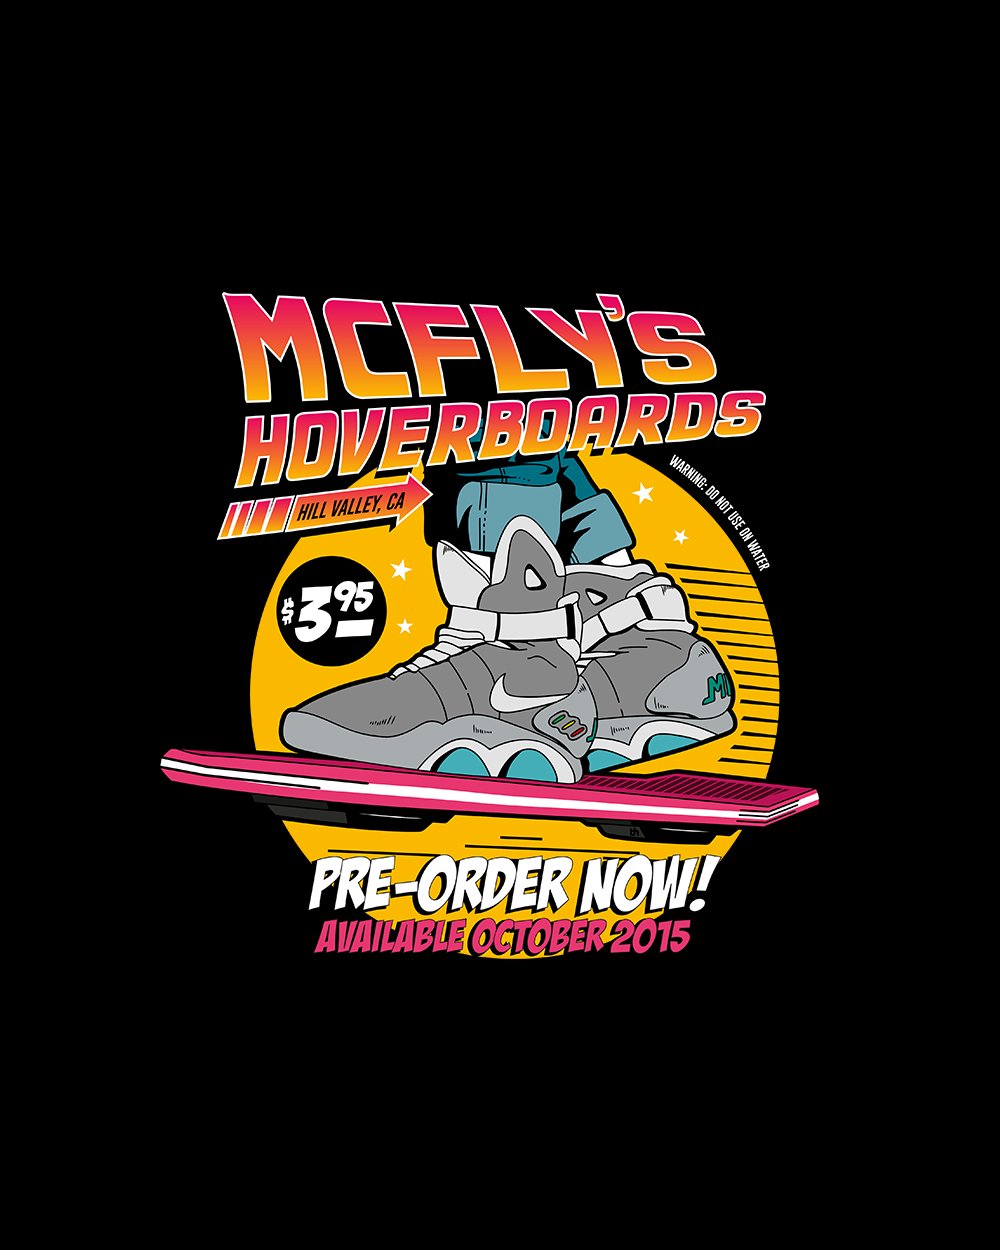 McFly's Hoverboards Tank Australia Online #colour_black